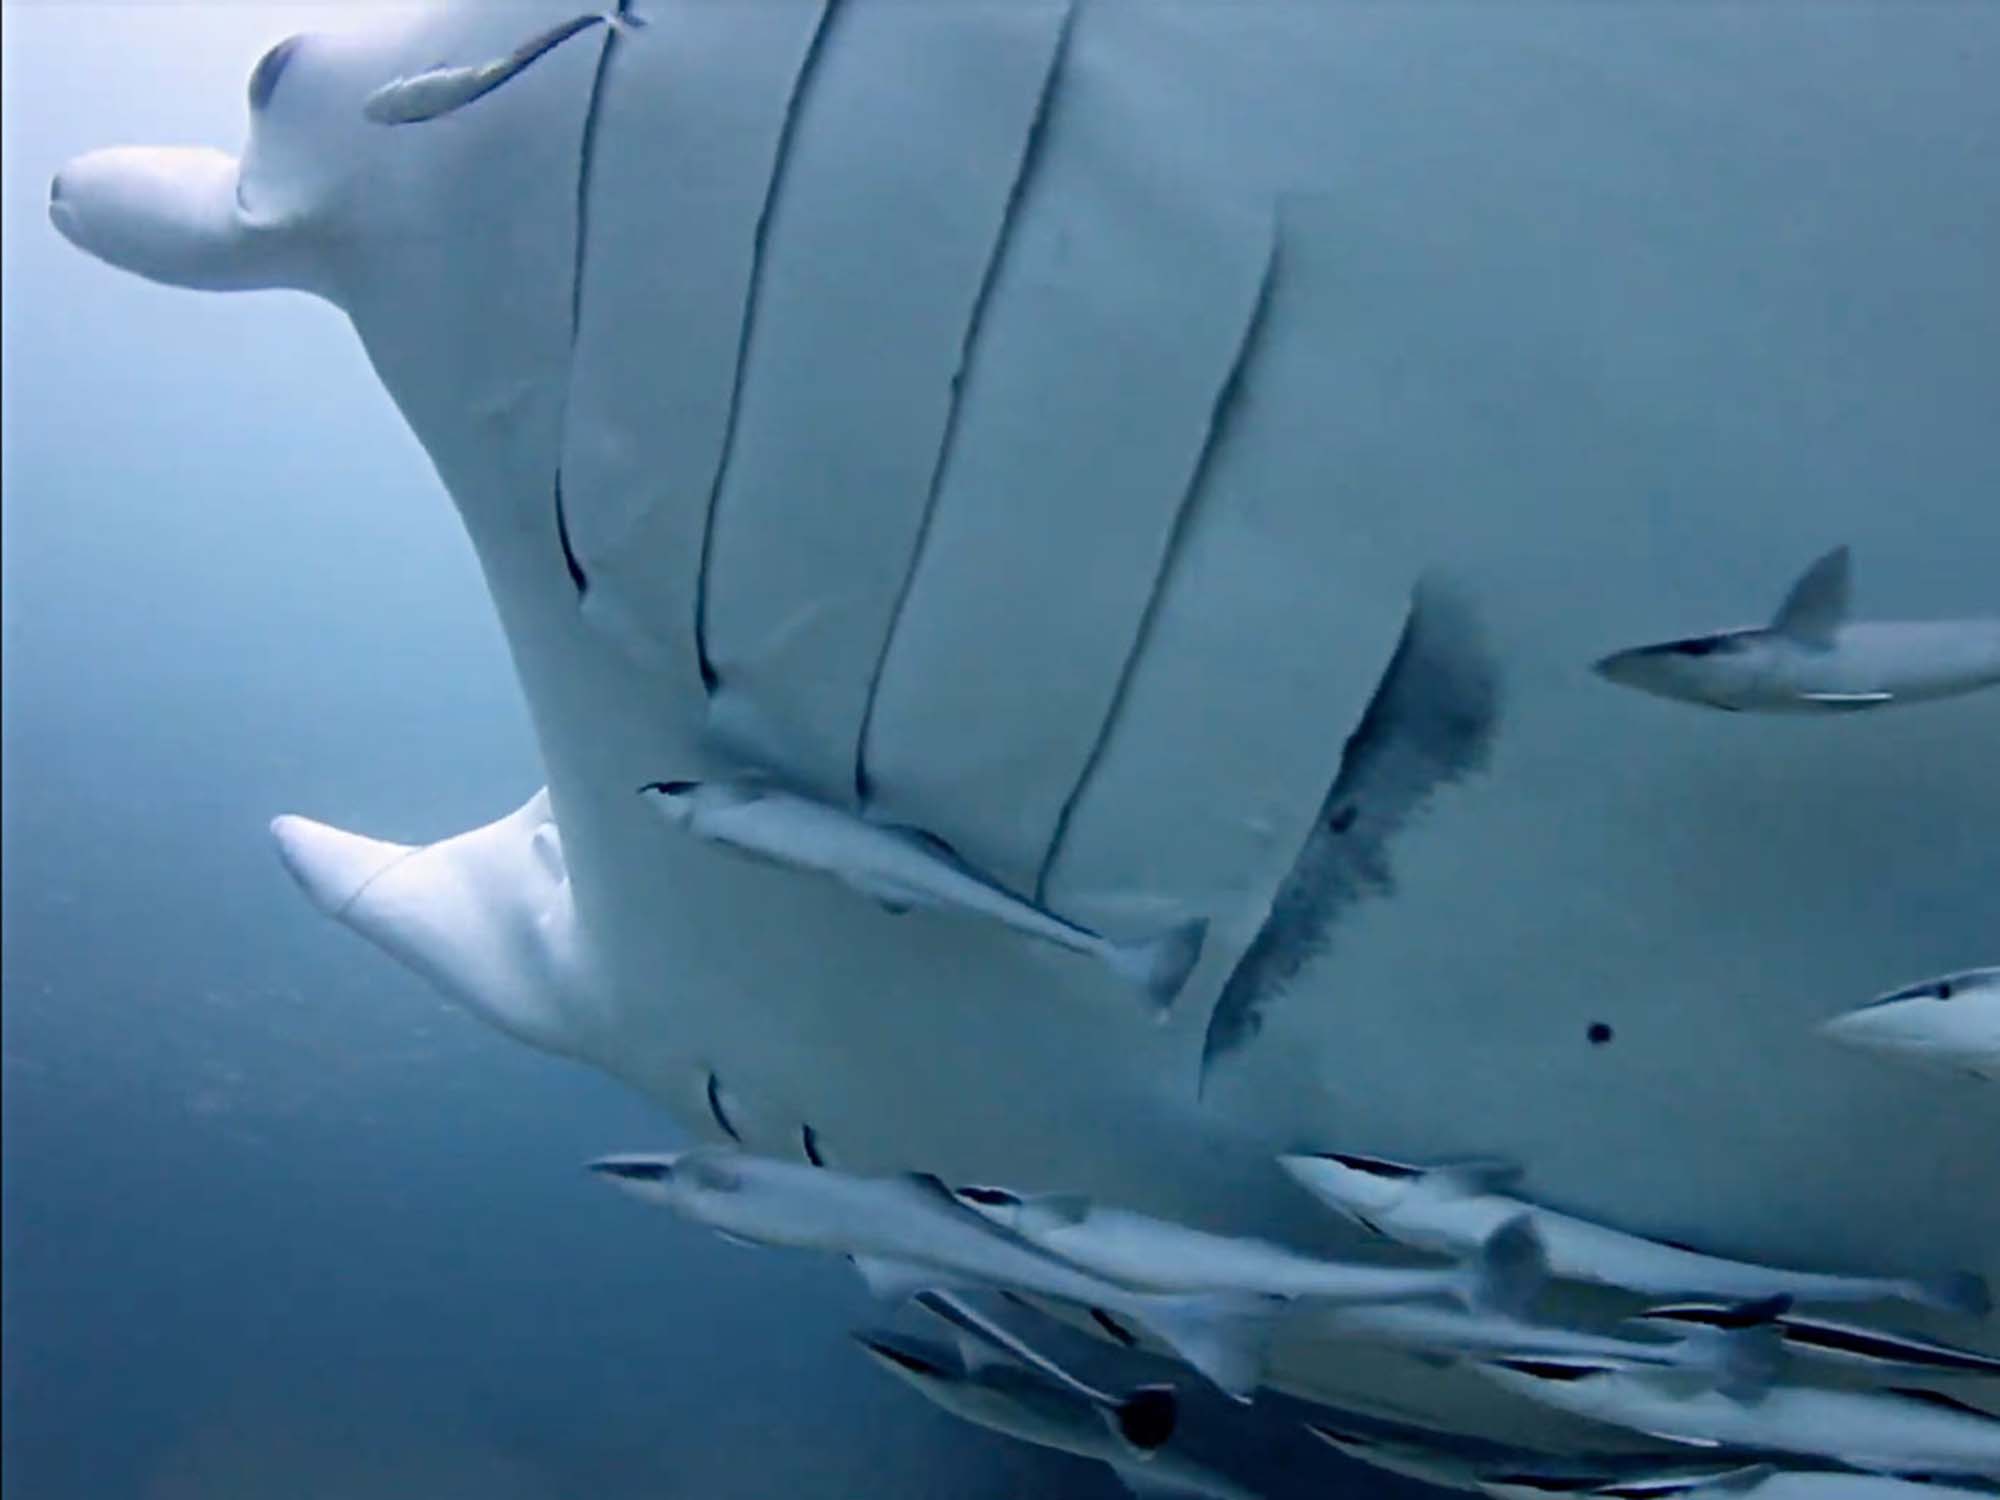 Gigantic Manta Rays Spotted in South Carolina [VIDEO]